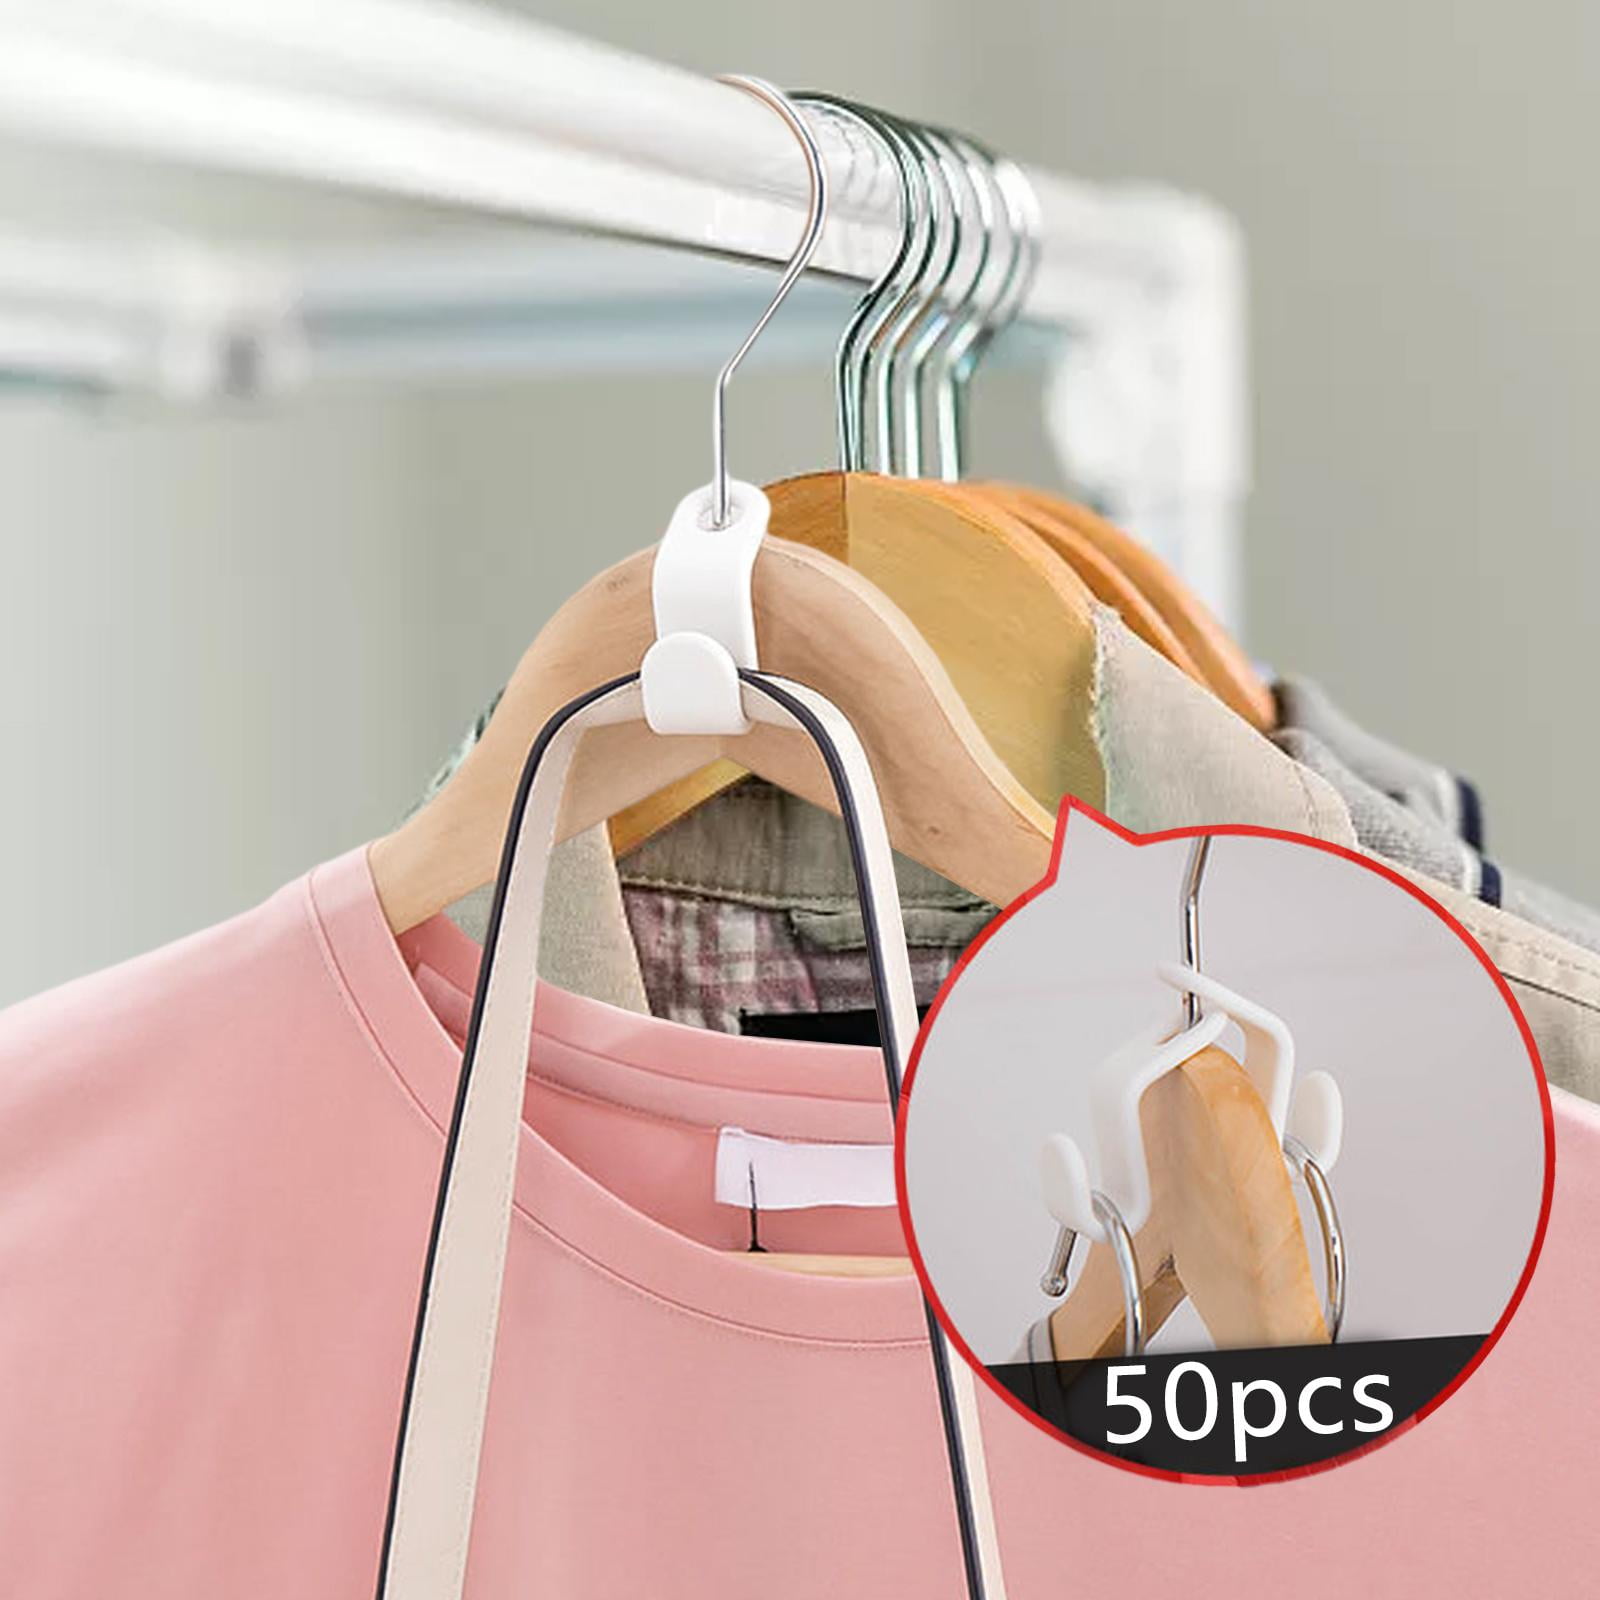 12 Pack New Space Triangles Clothes Hanger Connector Hooks Ultra- Premium  Hanger Hooks Triple Closet Space AS-SEEN-ON-TV